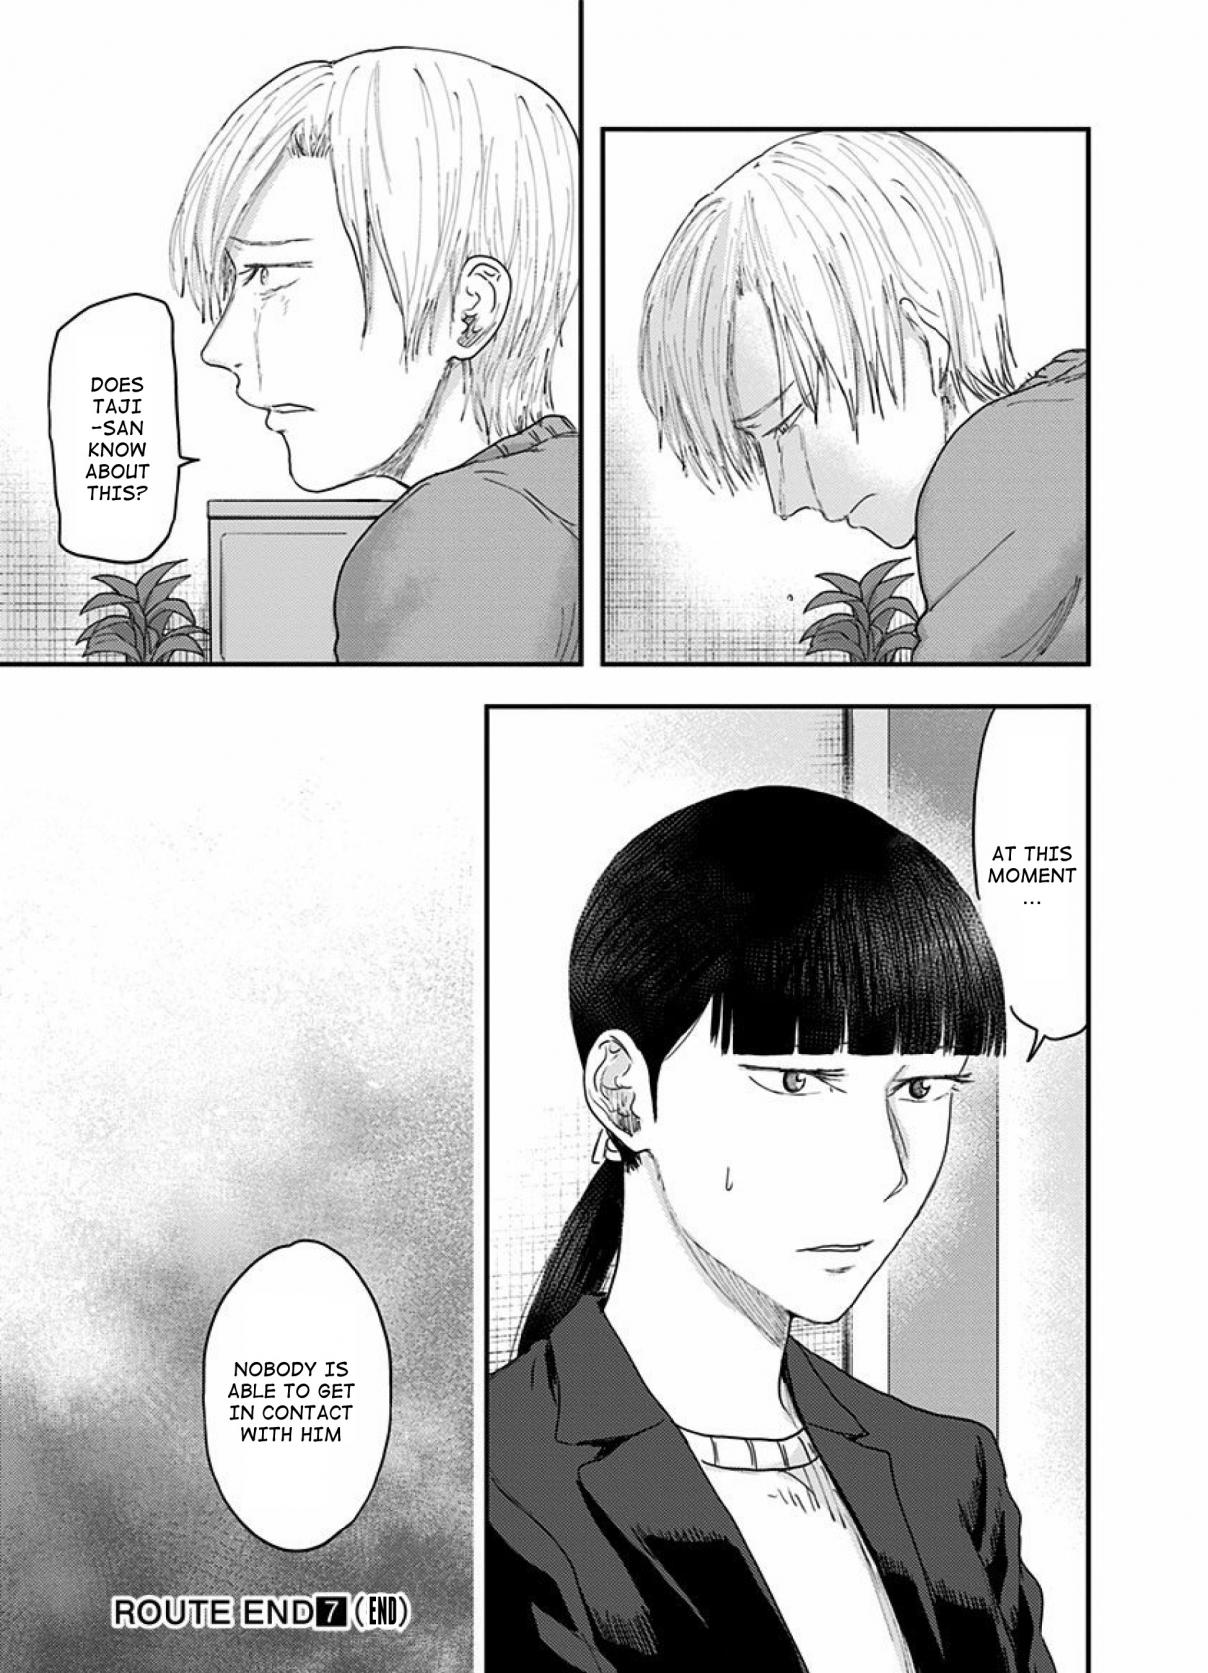 Route End Vol. 7 Ch. 48 The Ones Who Love And Hate (2)